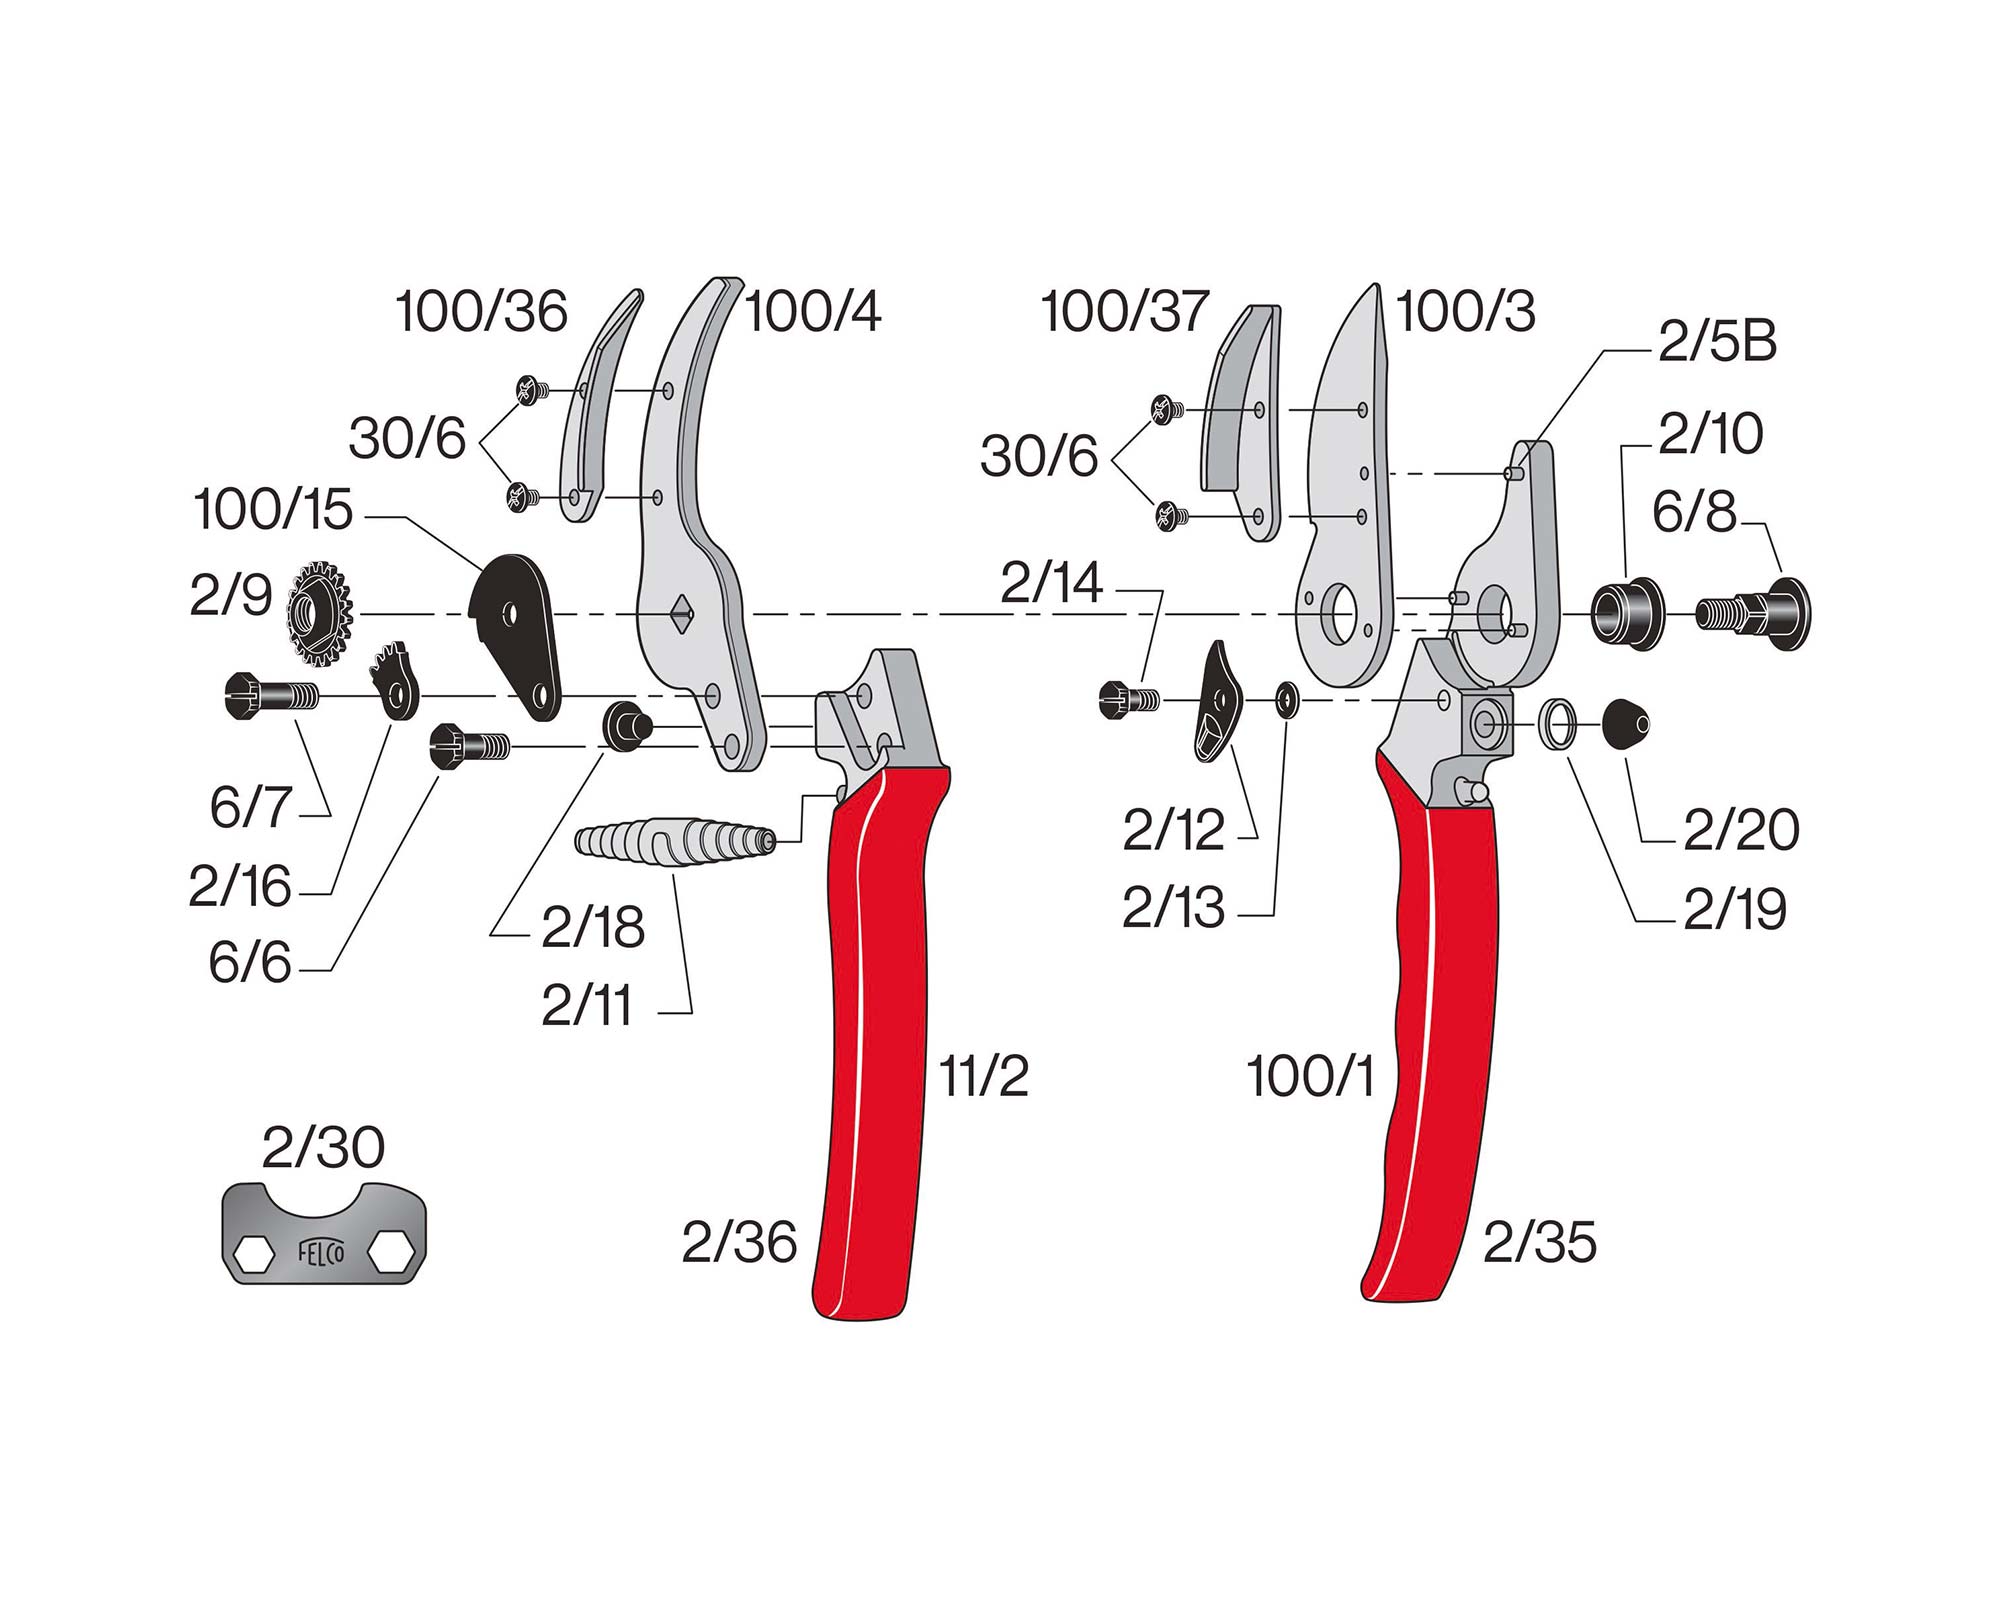 Exploded parts diagram for Felco100 secateurs